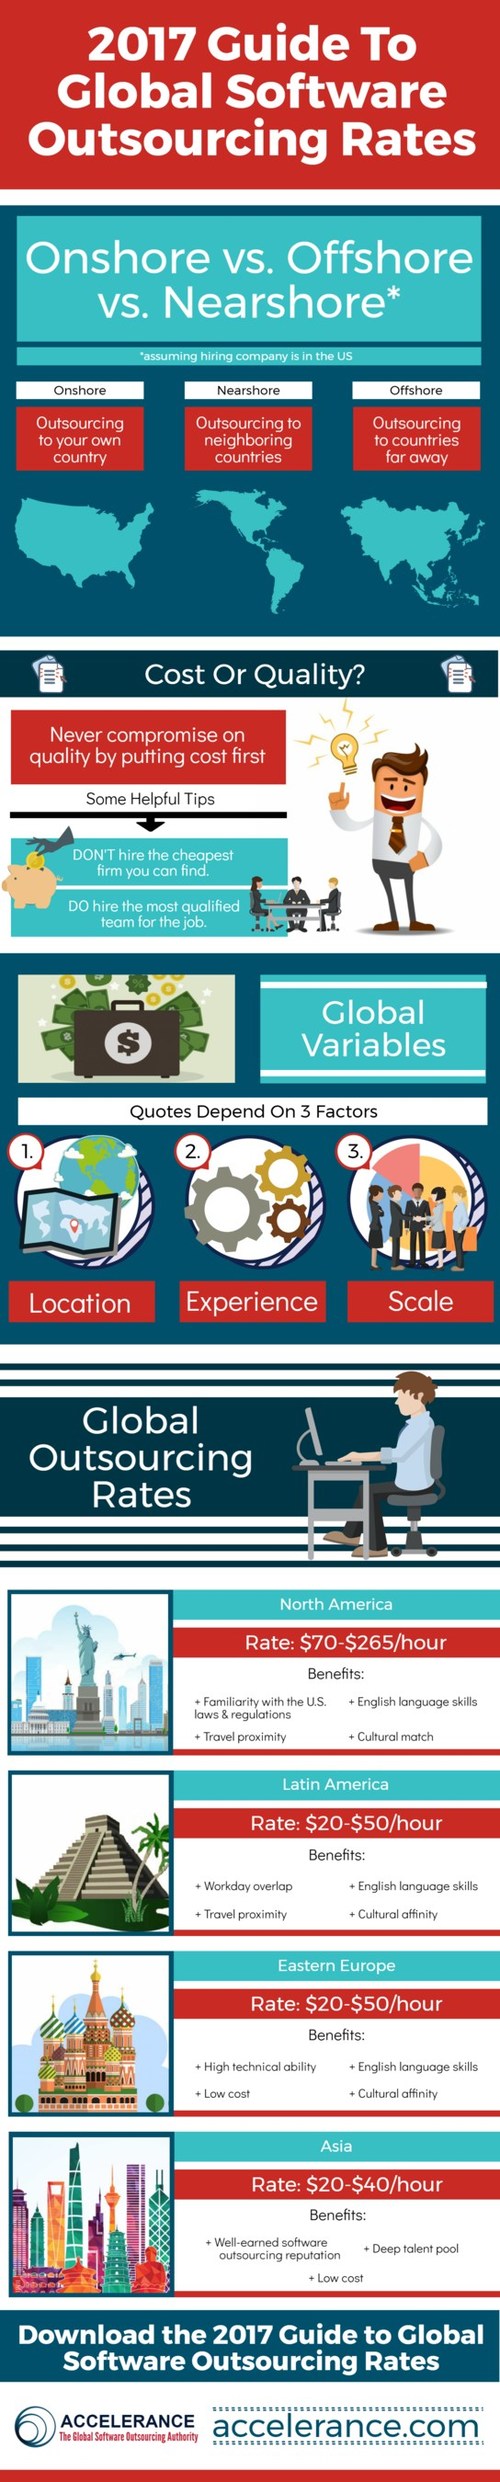 Infographic highlights Accelerance's new report, "2017 Guide to Global Software Outsourcing Rates." The infographic and complimentary guide present the competitive global rates an enterprise or chief technology officer (CTO) can expect to pay when outsourcing to various regions.